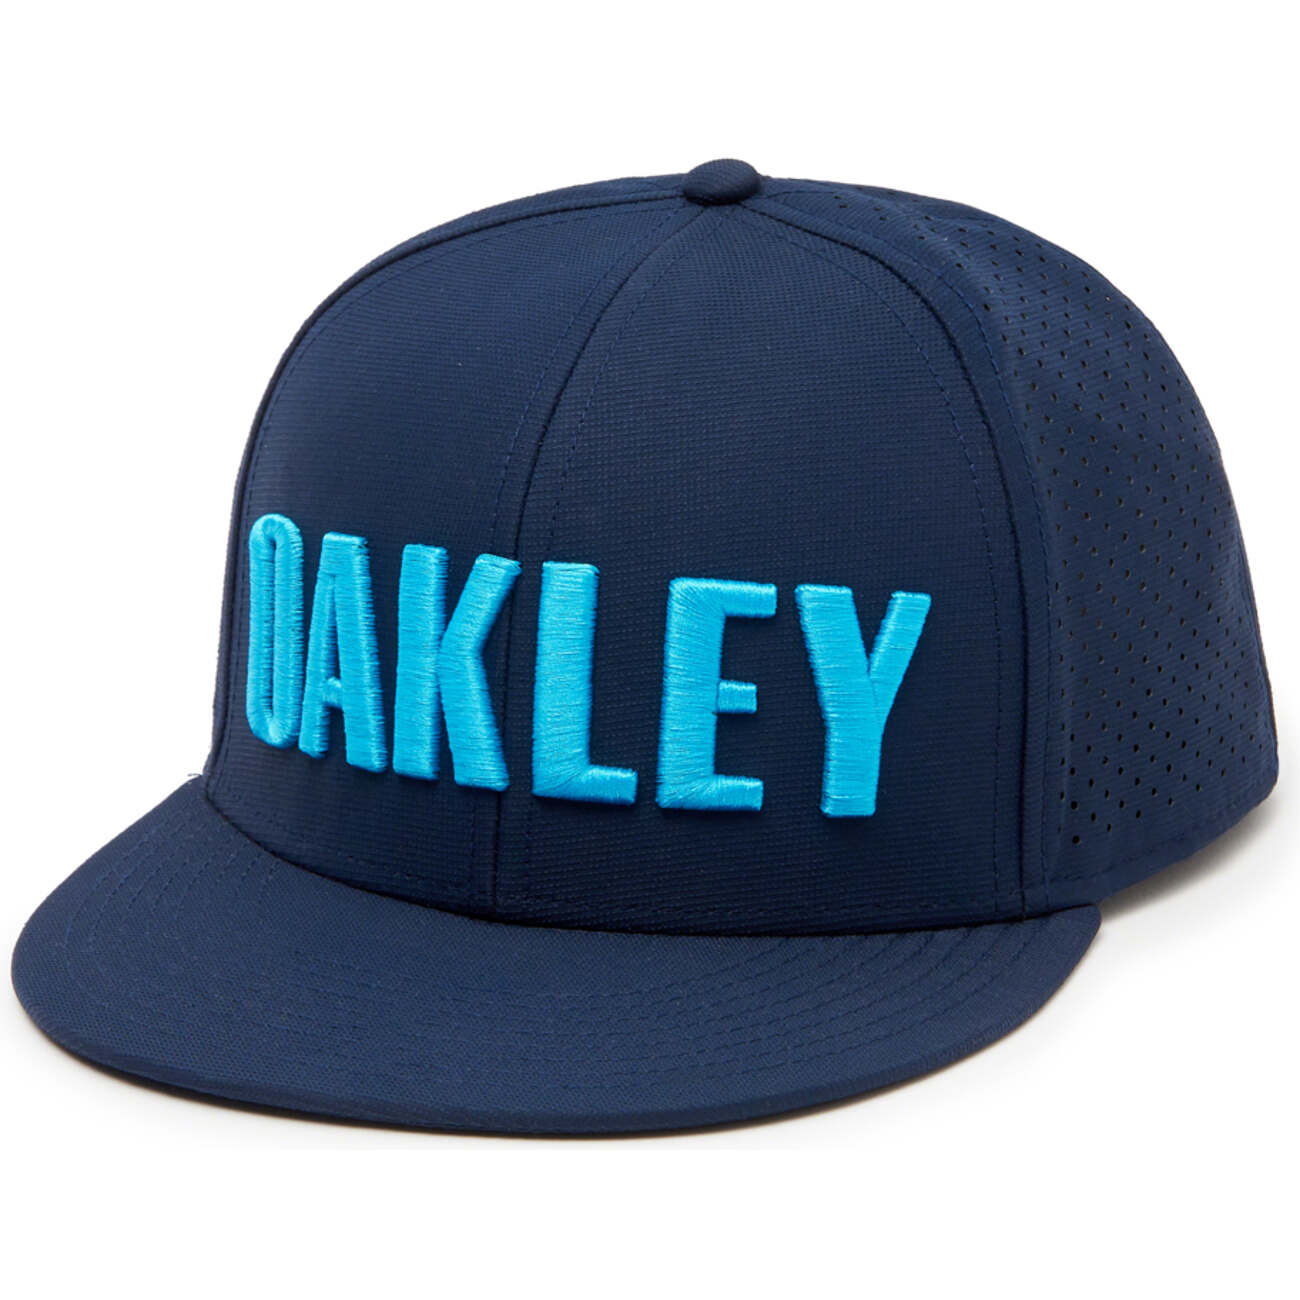 Oakley Snapback Cap Perforated Atomic Blue